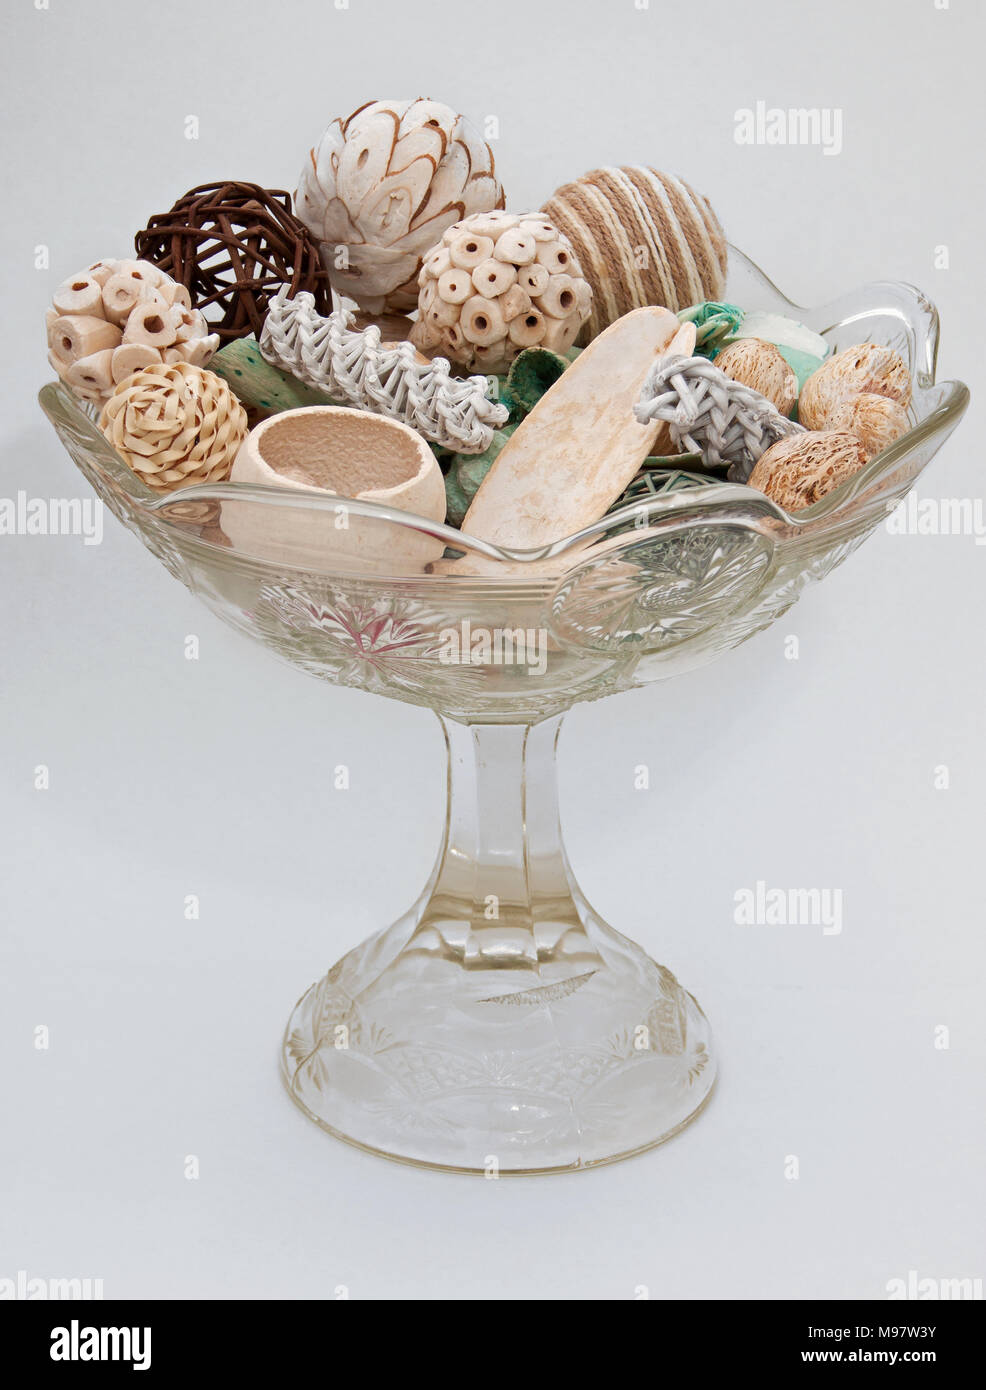 Clear glass vase filled with decorative material against a light background Stock Photo